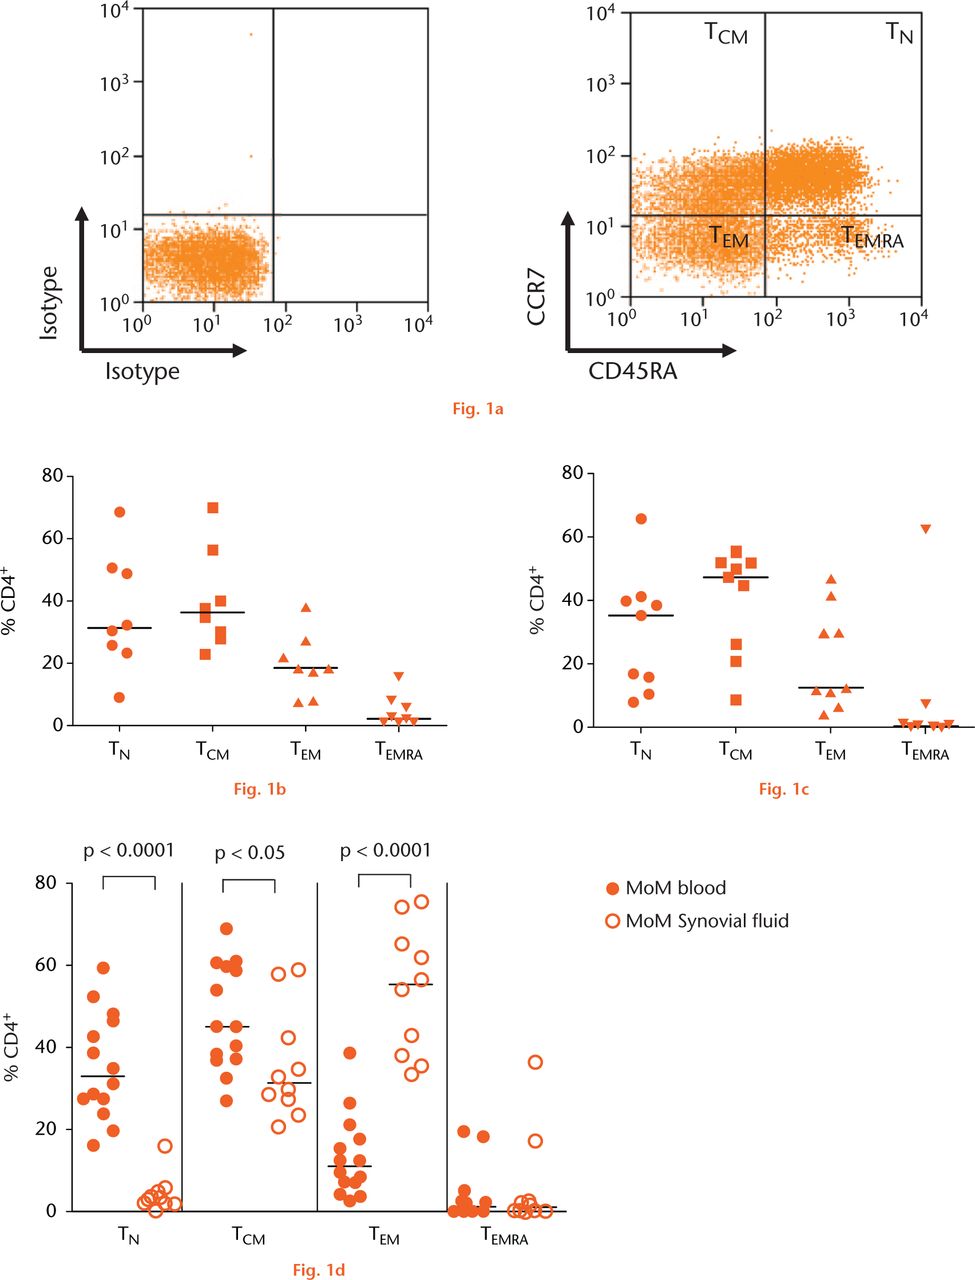  
            Graphs showing naïve and memory CD4+ T-cell subpopulations in two groups of revised hip arthroplasty patients and a control group with osteoarthritis: (a) Mononuclear cells gated for CD3+ and CD4+ were divided into naïve and memory subpopulations using CCR7 and CD45RA markers, (b) Pooled data for subpopulations of CD4+ T-cells in peripheral blood of the control group with osteoarthritis (OA) (n = 8). Horizontal lines indicate medians, (c) Pooled data for blood CD4+ T-cell subpopulations in patients with metal-on-polyethylene (MoP) hips (n = 9). Horizontal lines indicate medians,(d) Naïve and memory CD4+ T-cell populations in peripheral blood (n = 14) and synovial fluid (n = 10) of patients with metal-on-metal (MoM) hips (D). Horizontal lines indicate medians. (TCM =central memory T-cell; TEM=effector memory T-cell; TN=naïve T-cell; TEMRA=terminally differentiated effector memory cell).
          